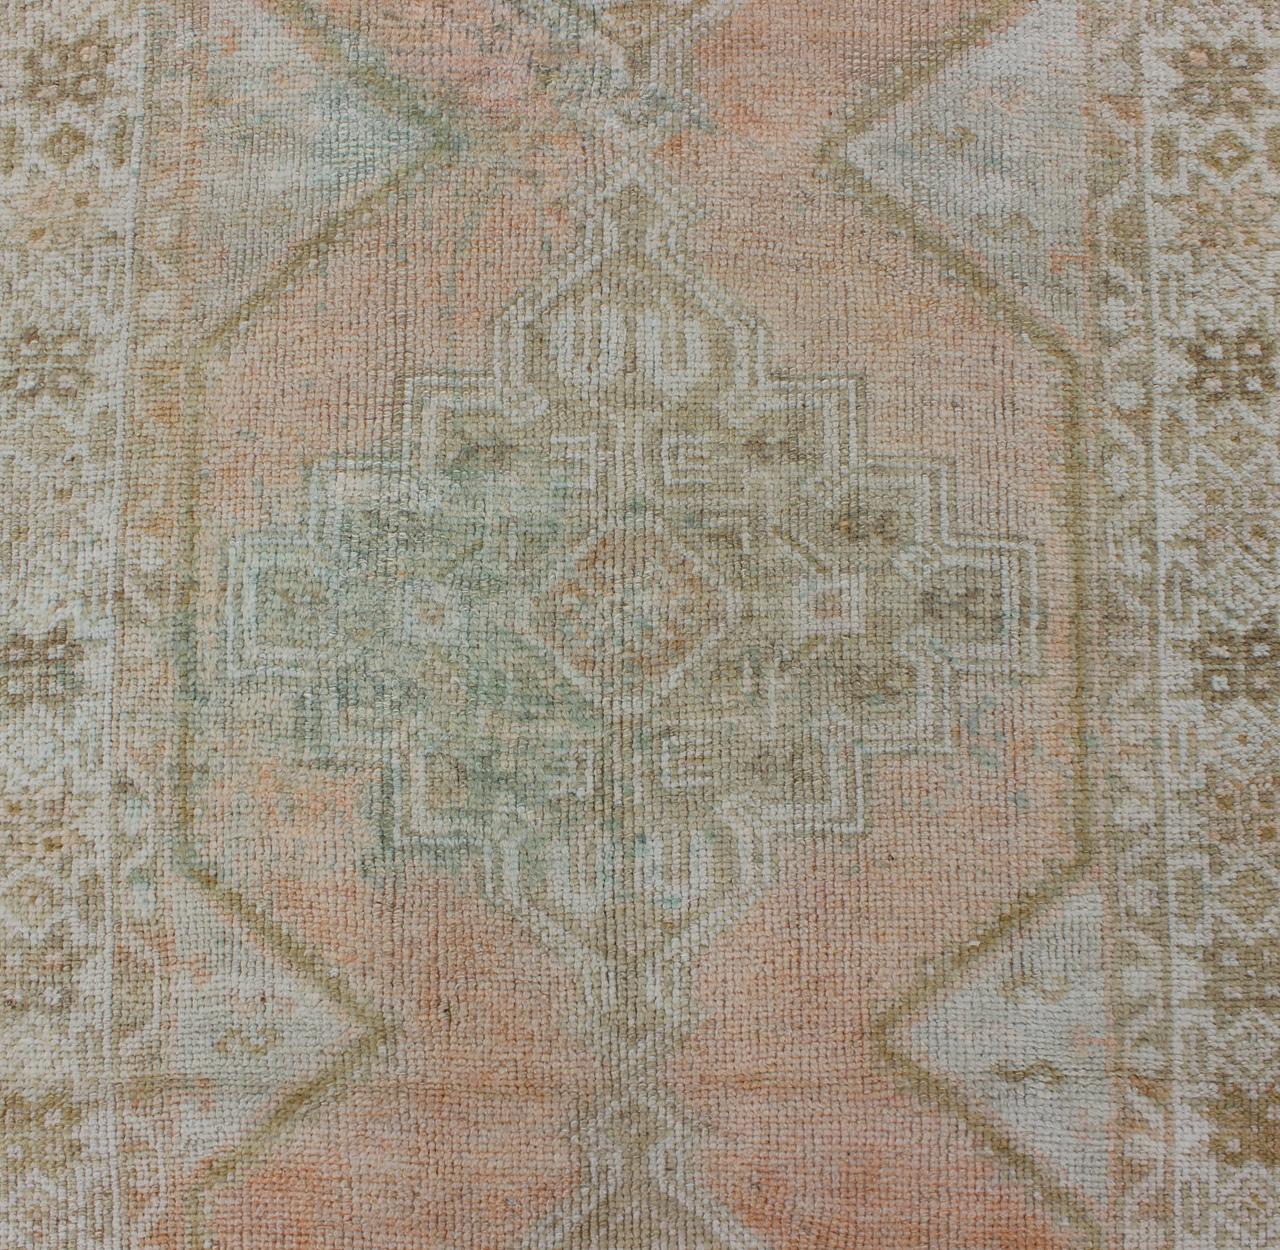 Wool Vintage Turkish Oushak Runner with Faded Coral, Green and Light Brown